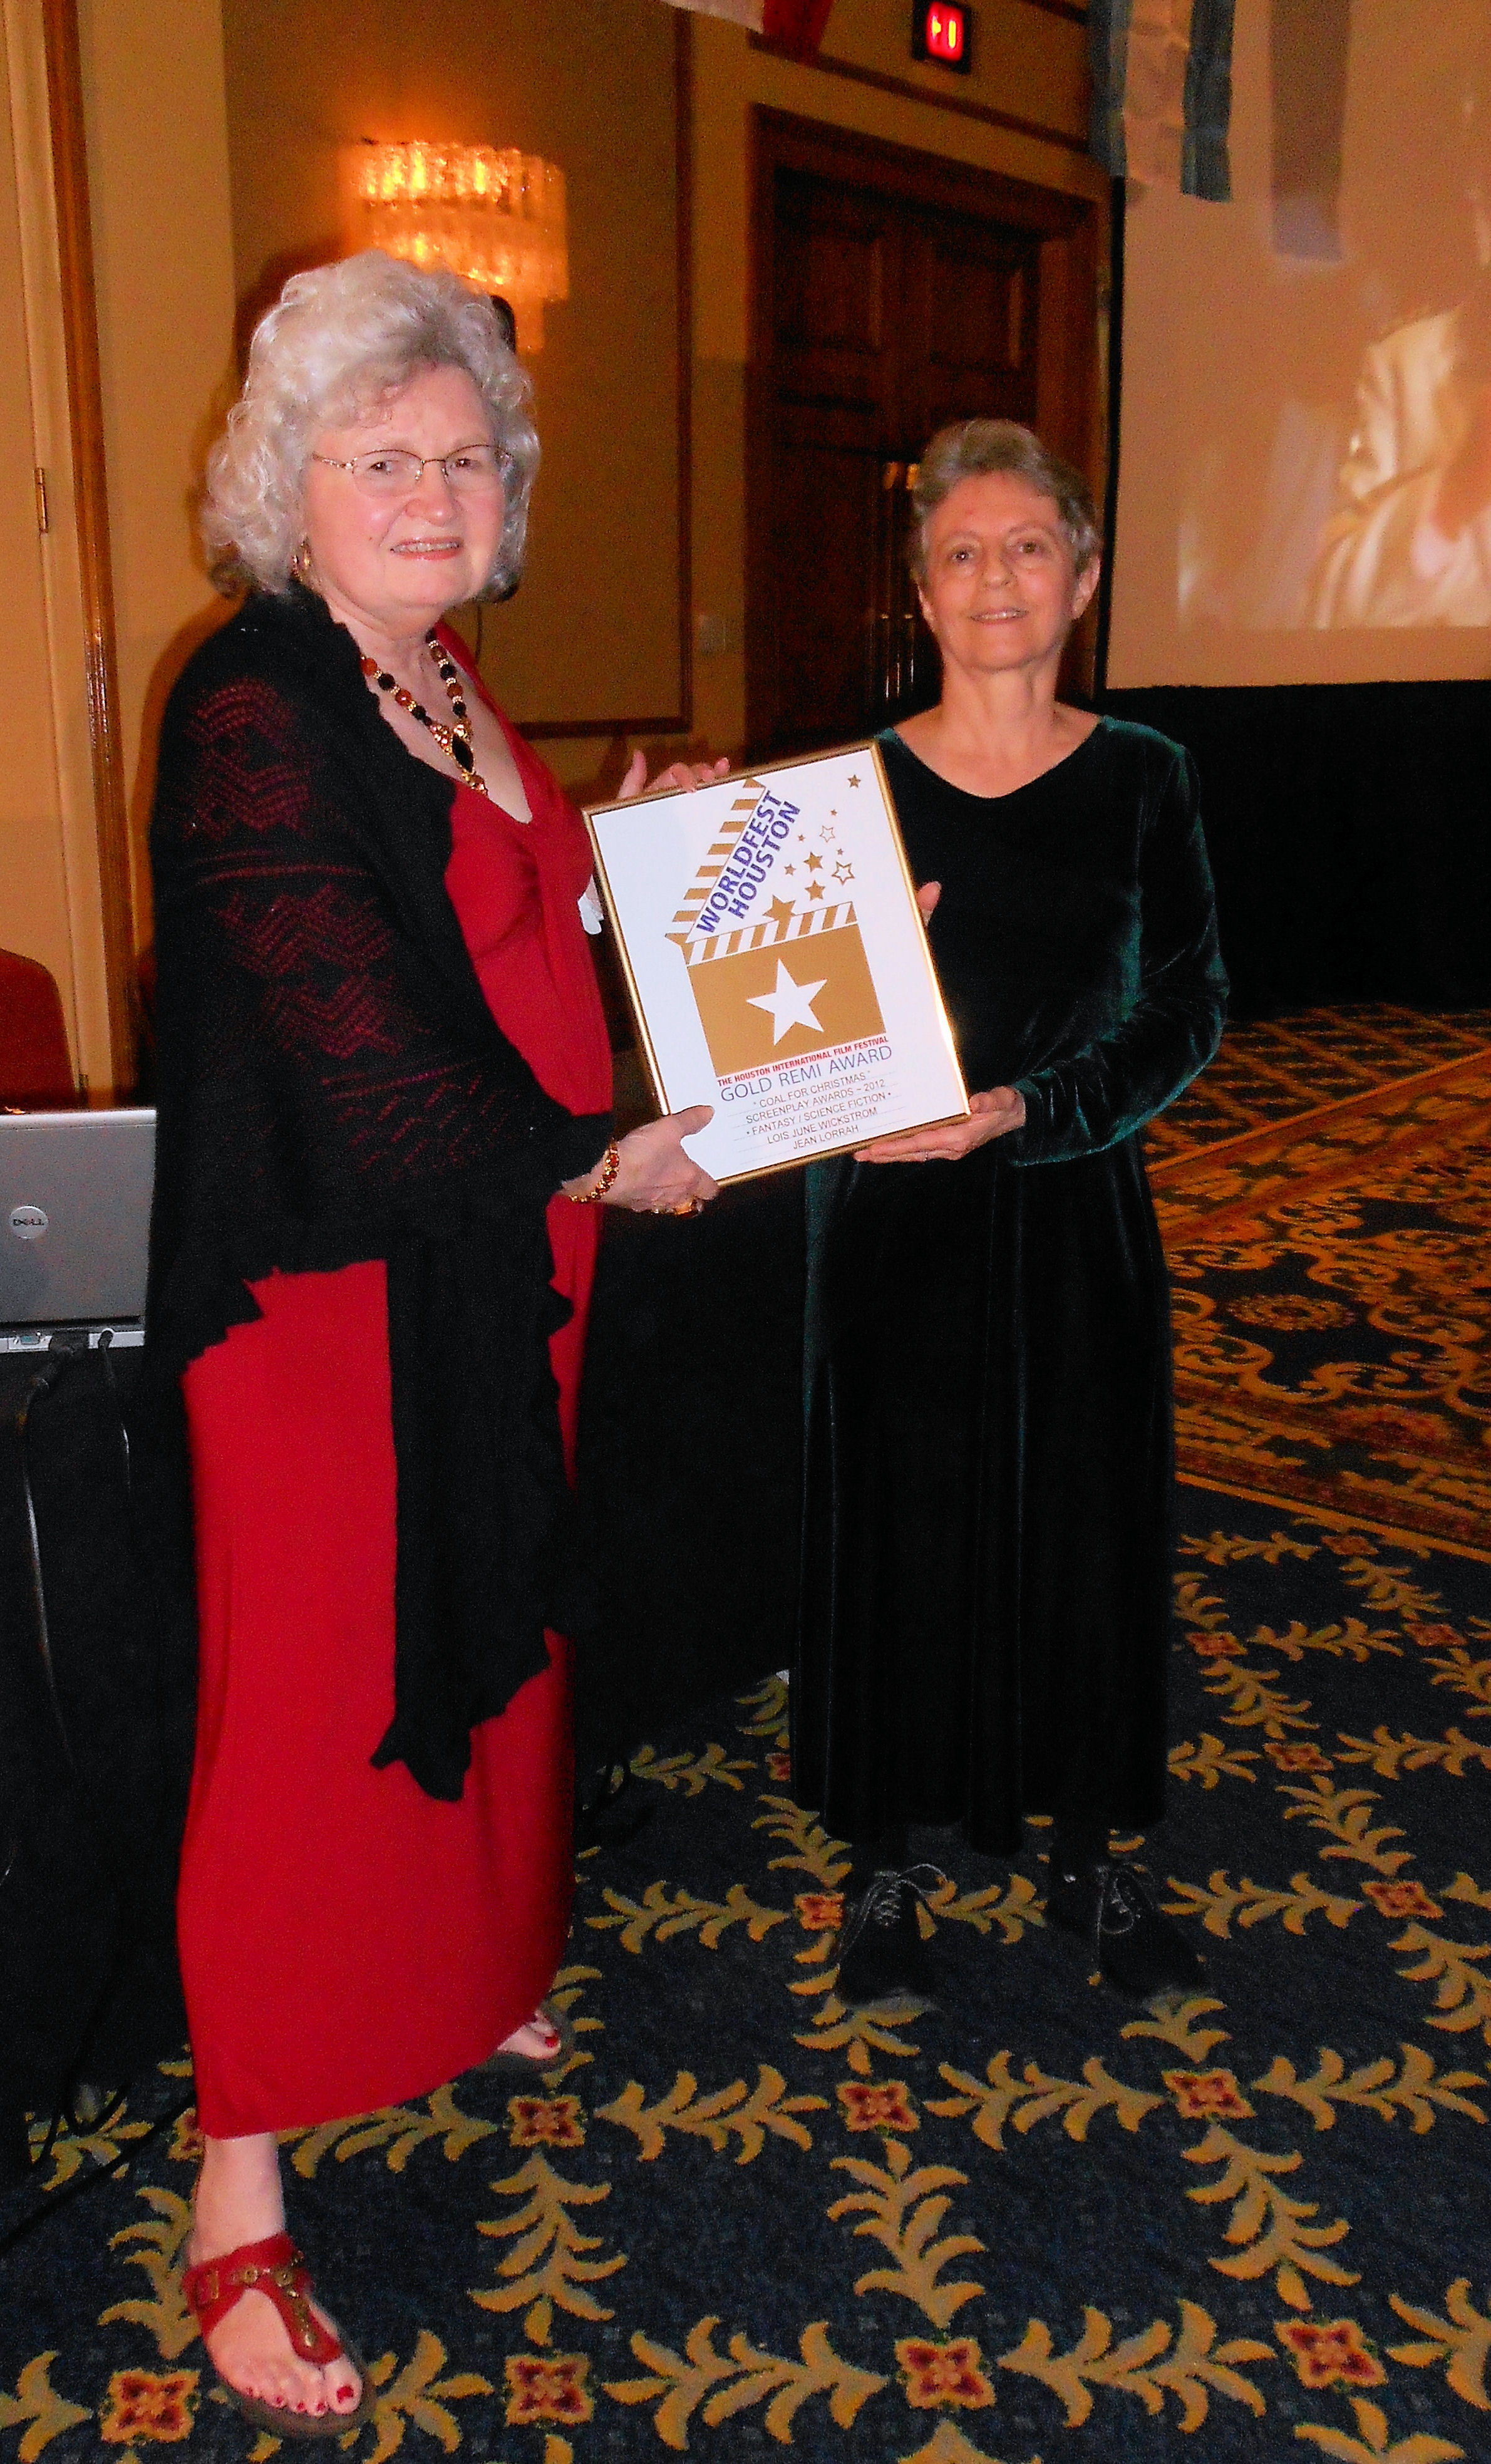 Jean Lorrah (left) and Lois Wickstrom (right) with their Gold Remi for Family Screenplay, WorldFest 45, April, 2012.